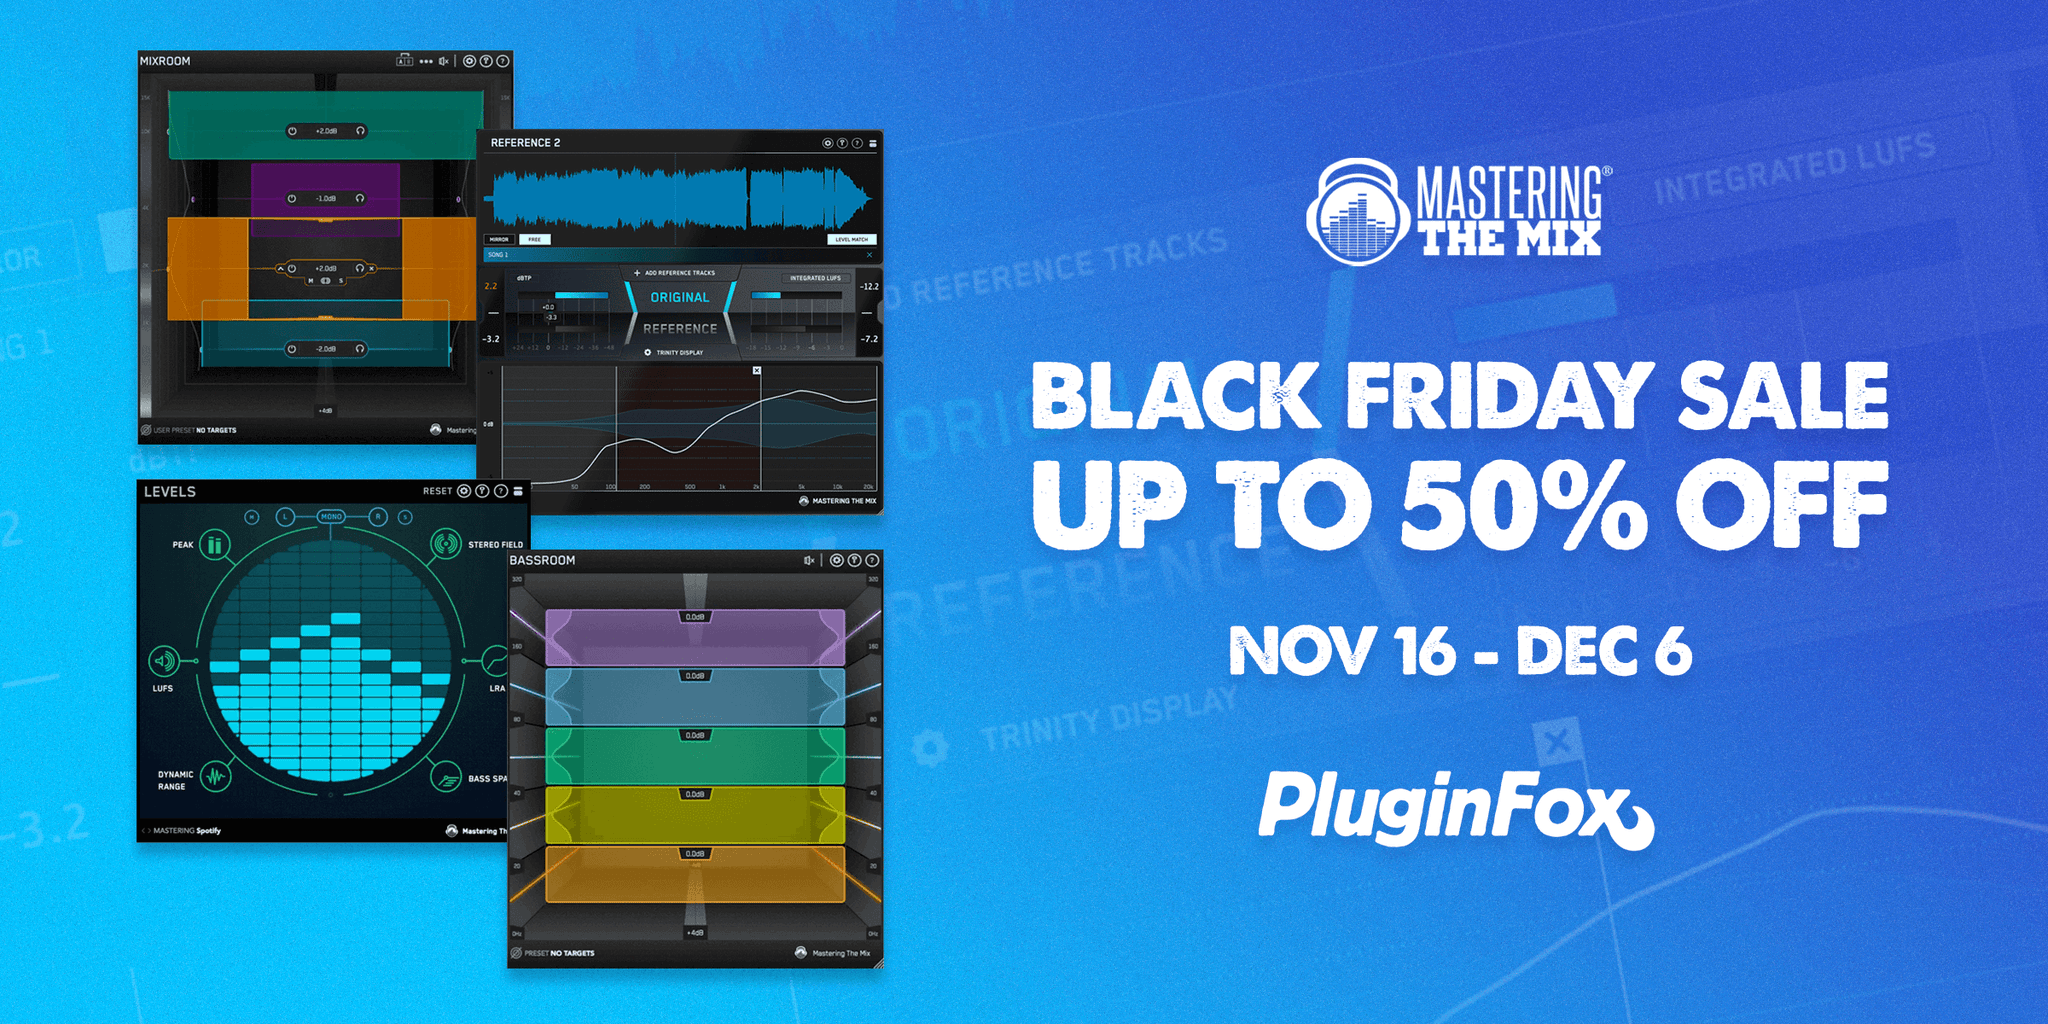 Mastering the Mix Black Friday Sale